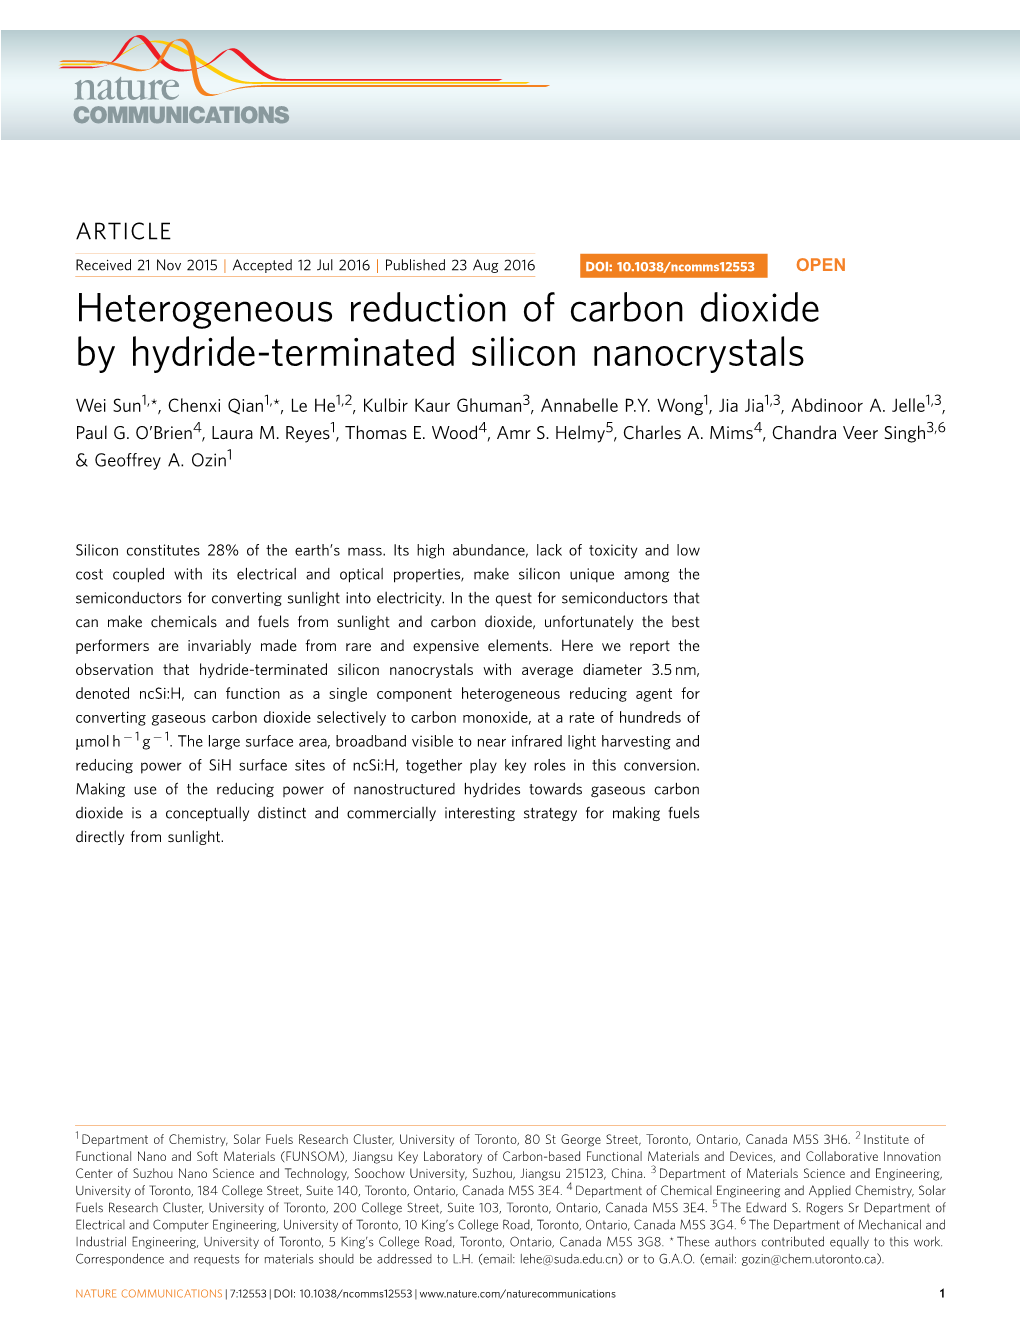 Heterogeneous Reduction of Carbon Dioxide by Hydride-Terminated Silicon Nanocrystals